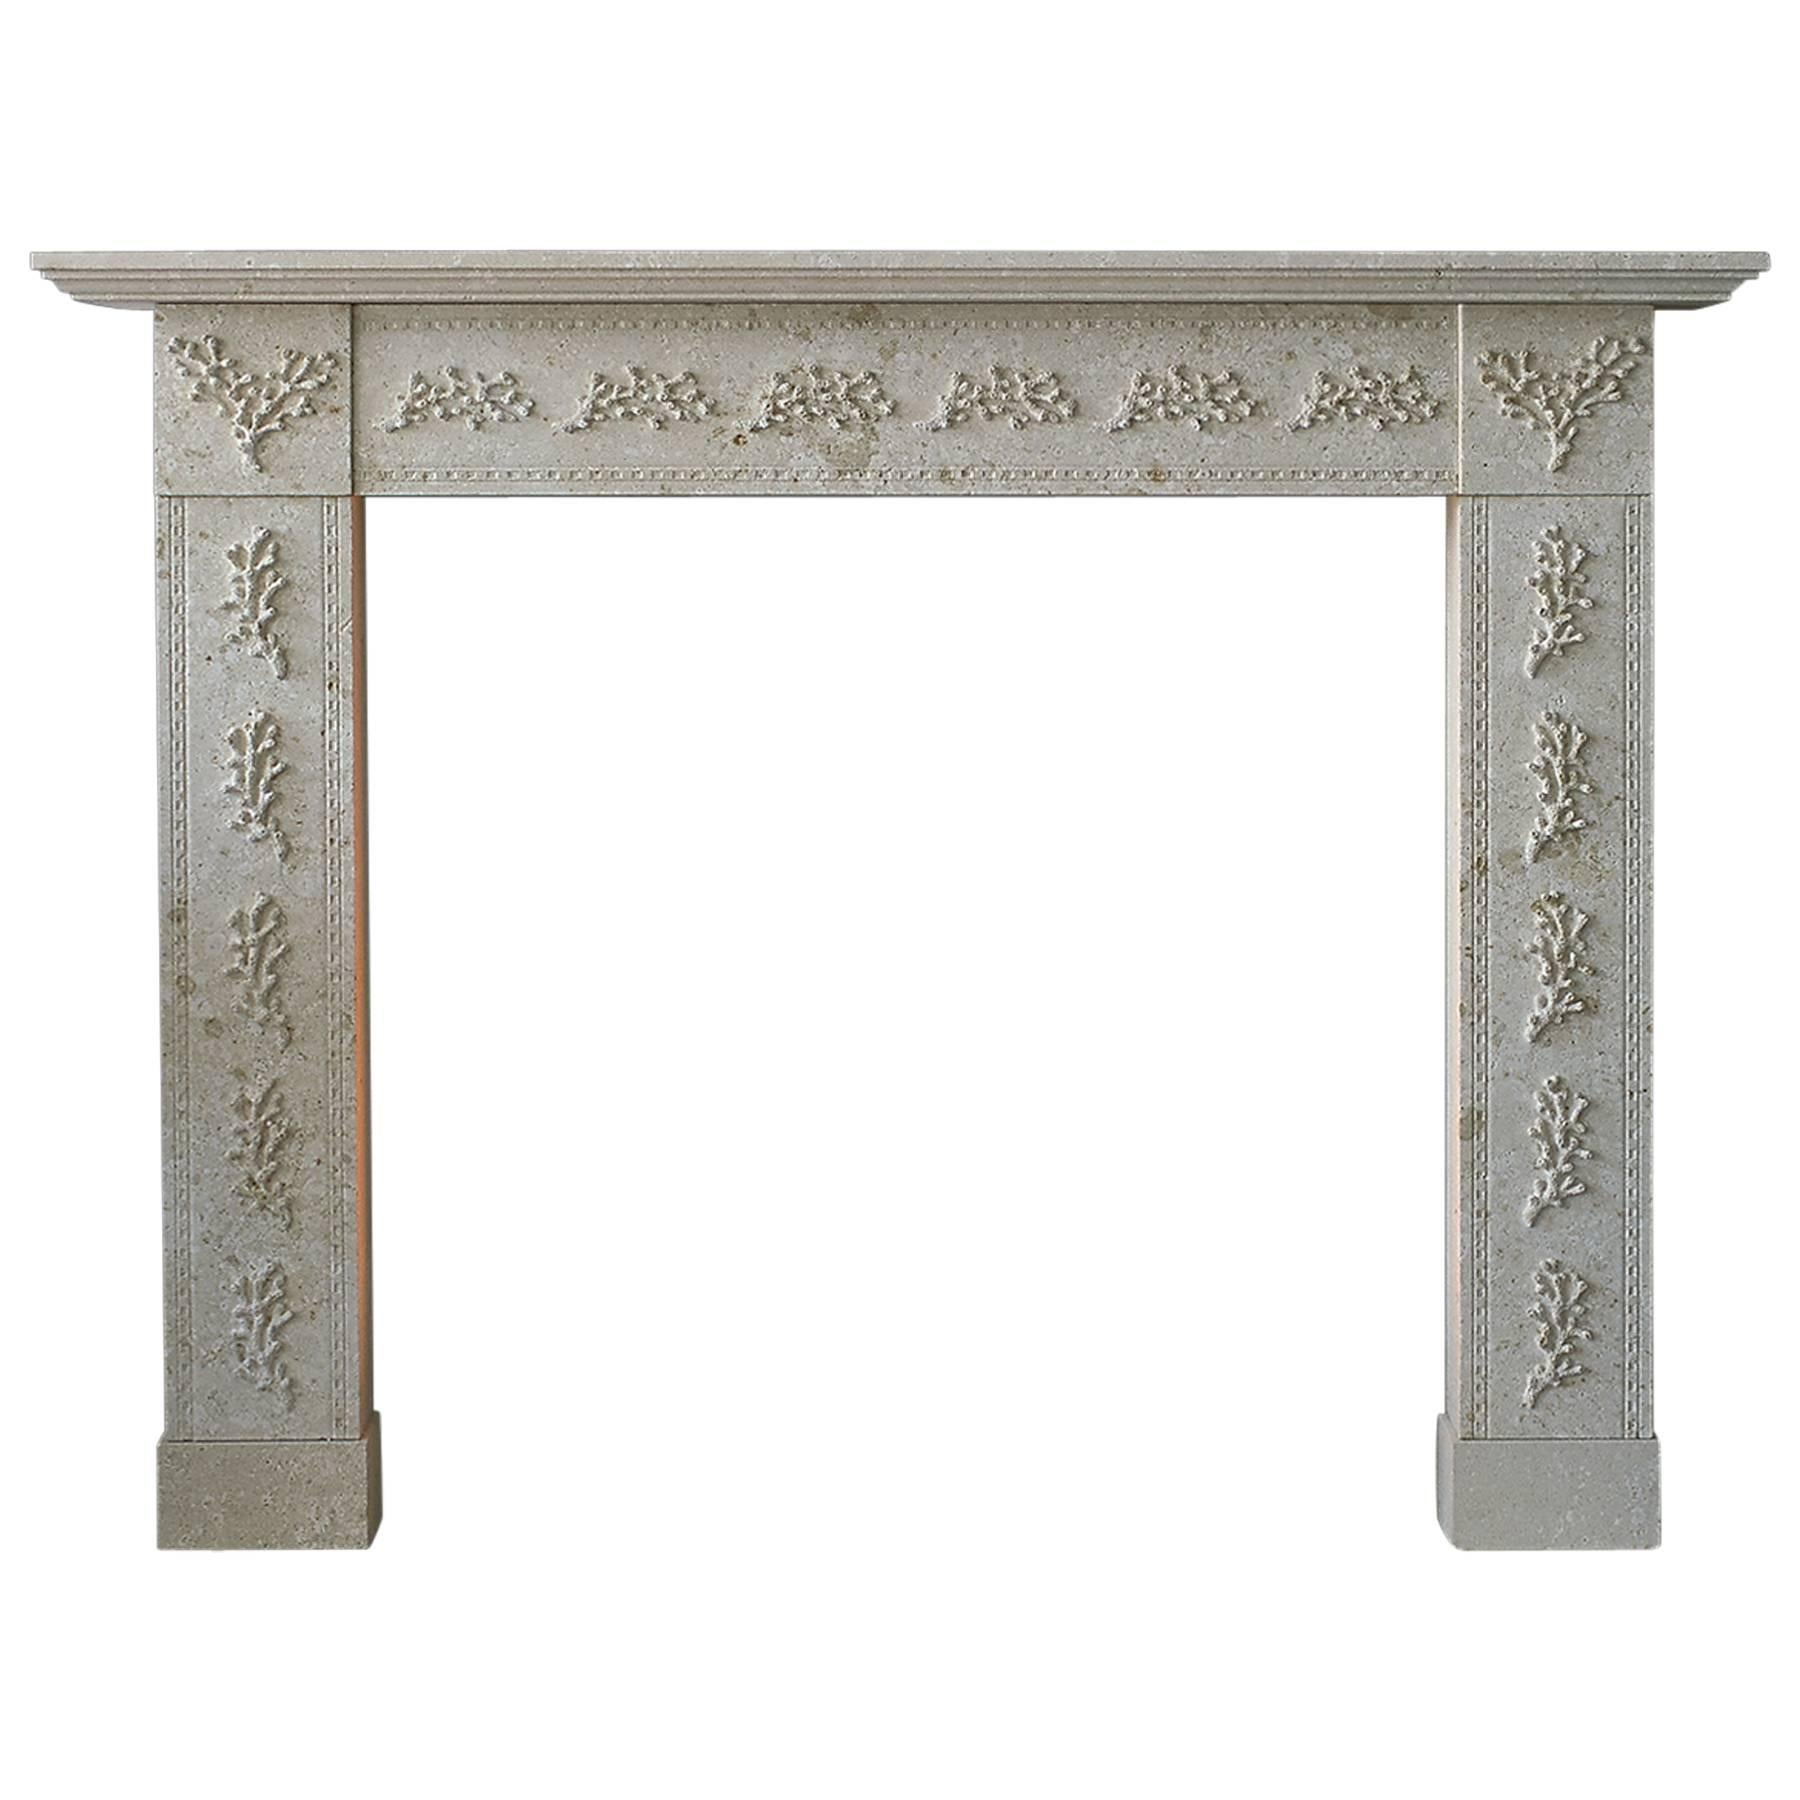 Limestone Mantel with Delicate Relief Carving